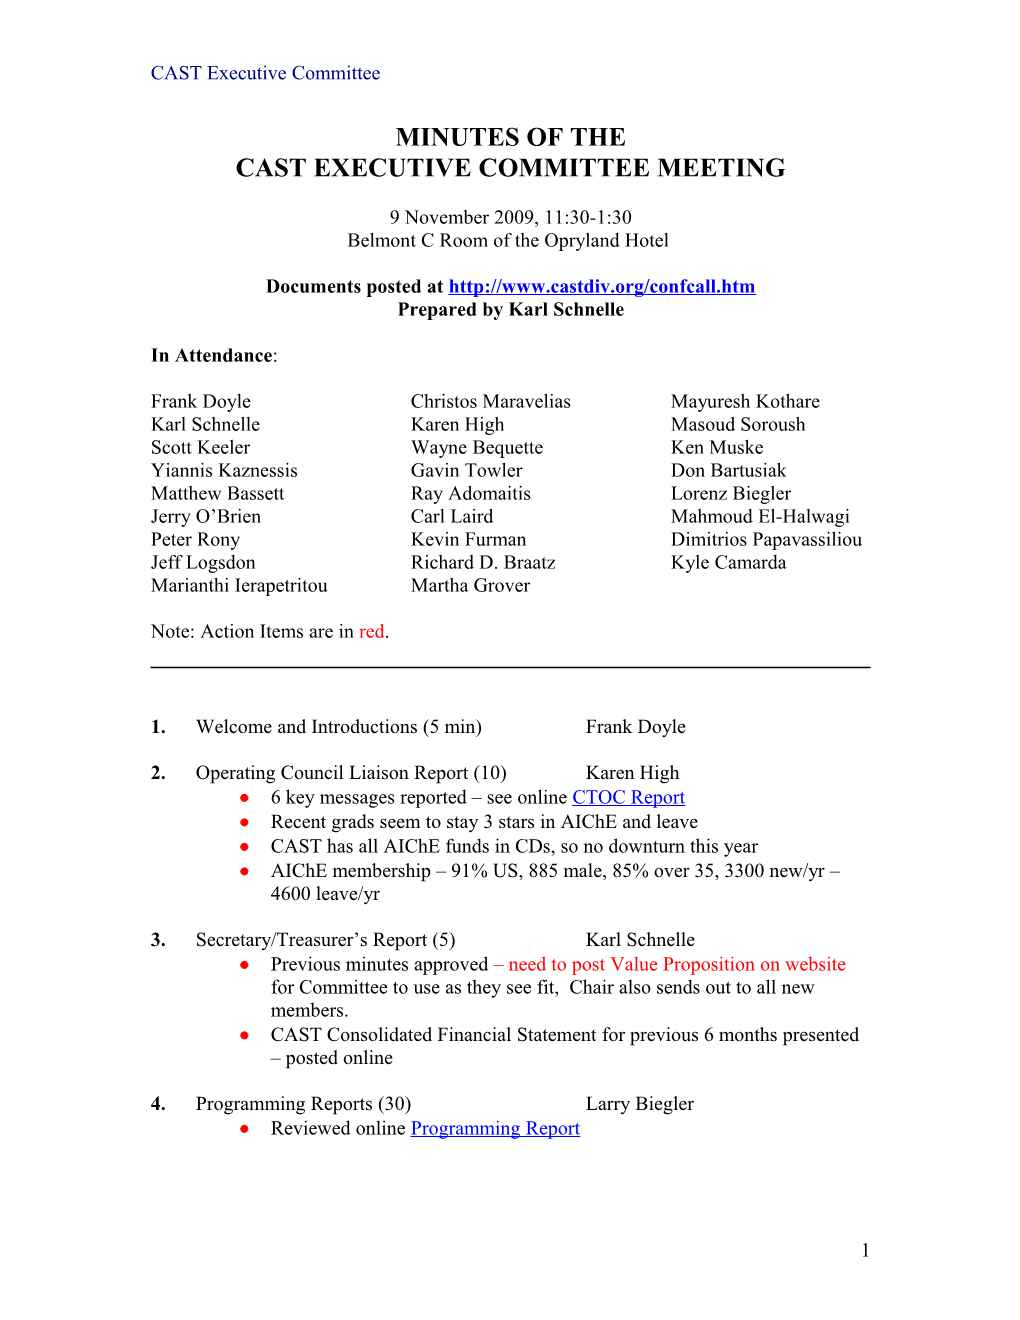 Cast Executive Committee Meeting